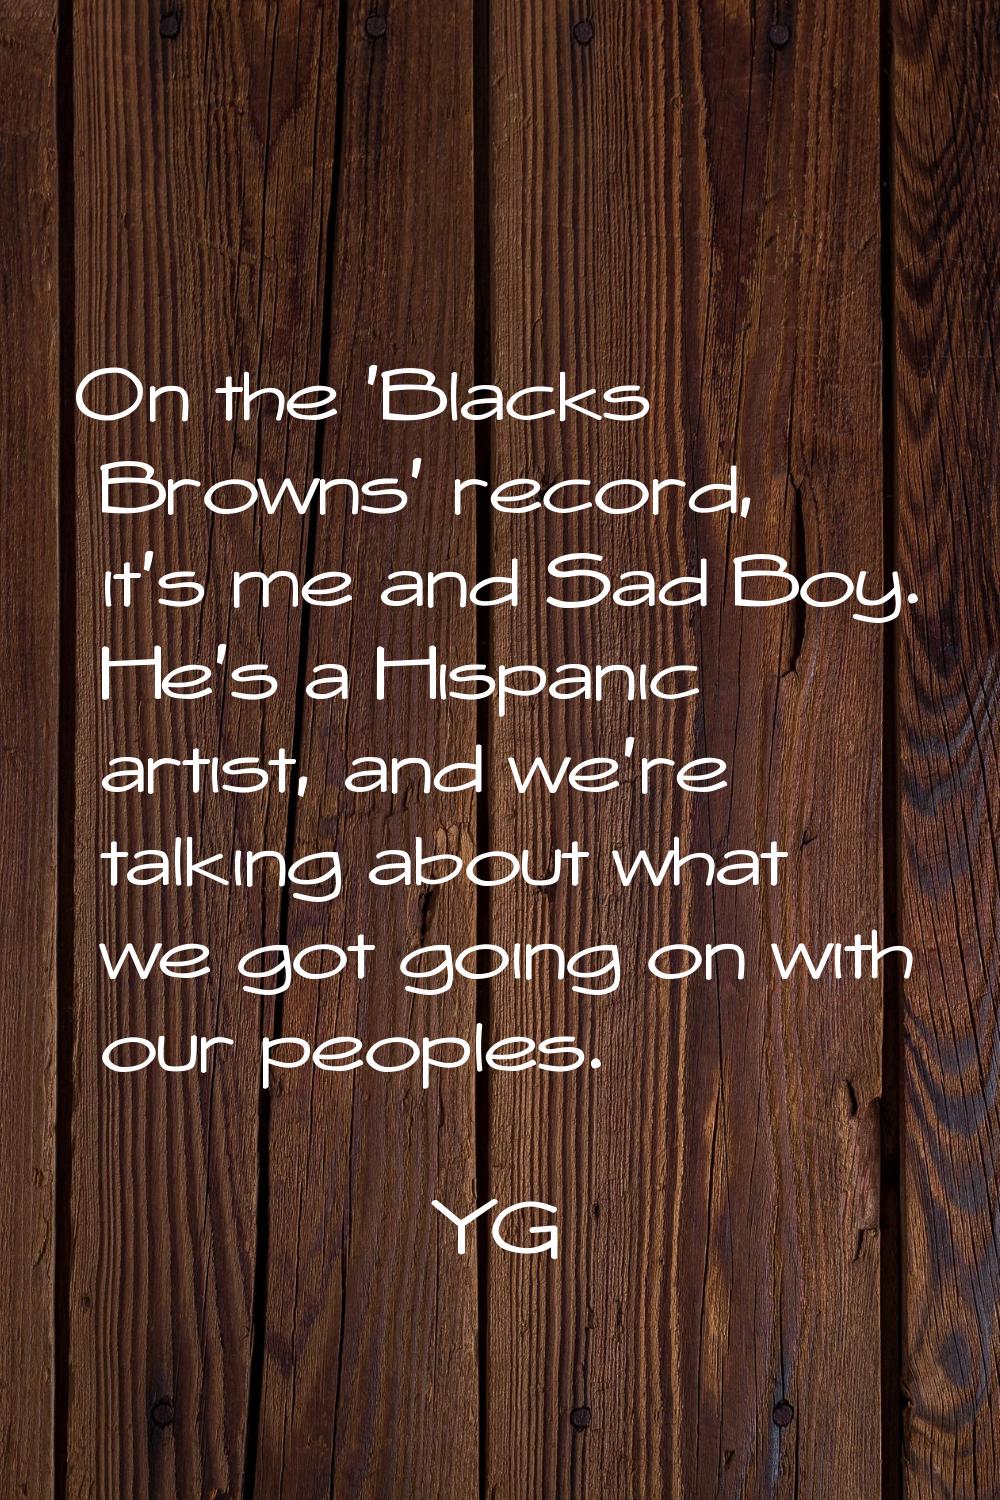 On the 'Blacks & Browns' record, it's me and Sad Boy. He's a Hispanic artist, and we're talking abo